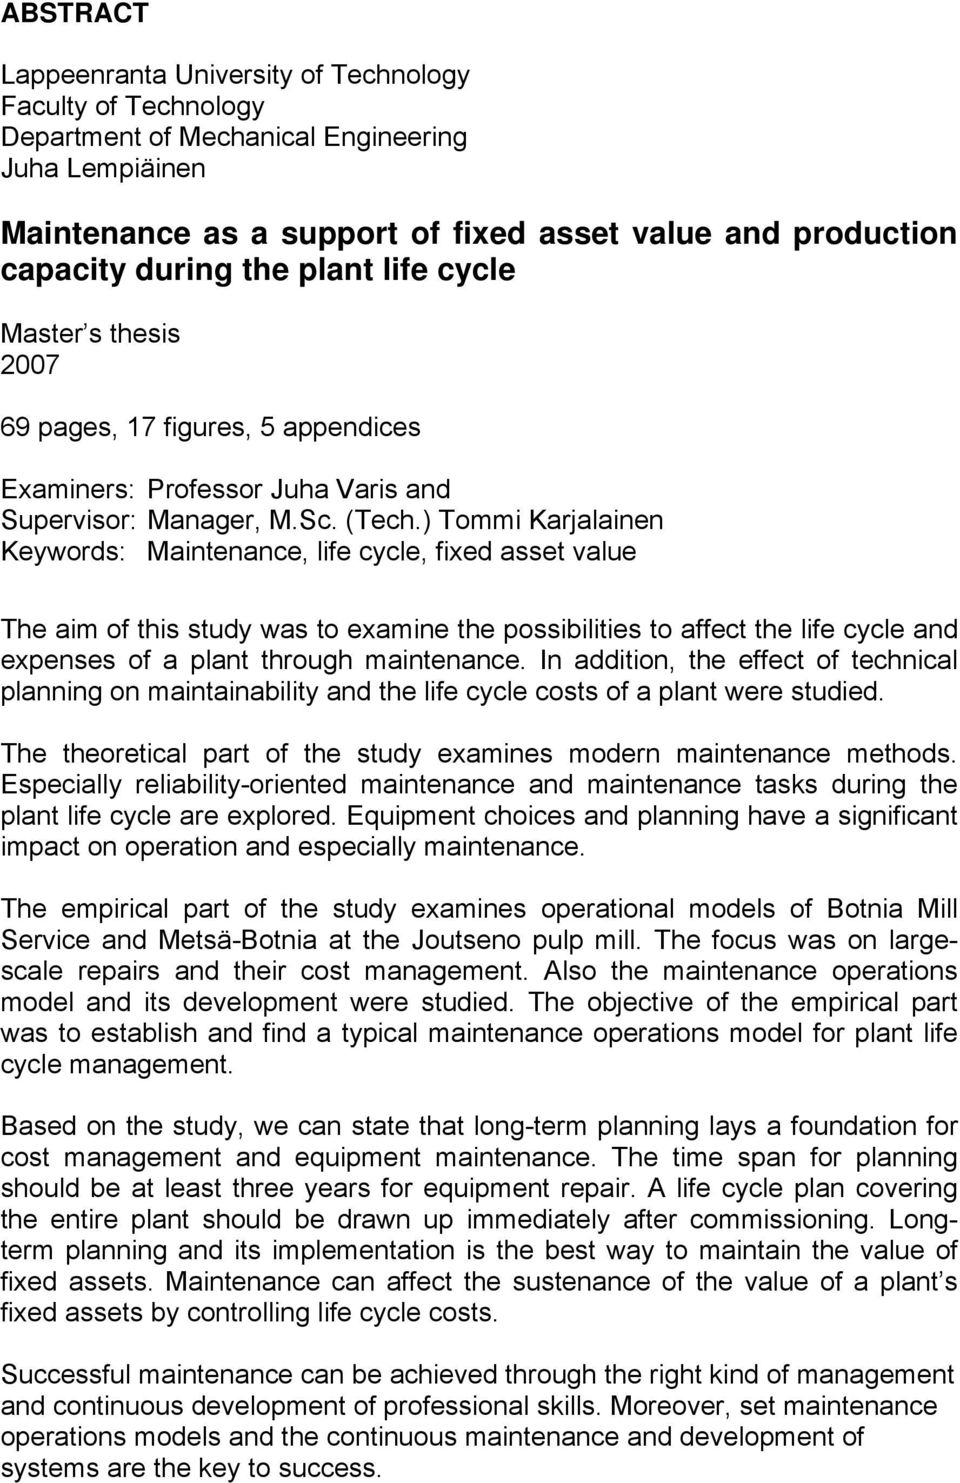 ) Tommi Karjalainen Keywords: Maintenance, life cycle, fixed asset value The aim of this study was to examine the possibilities to affect the life cycle and expenses of a plant through maintenance.